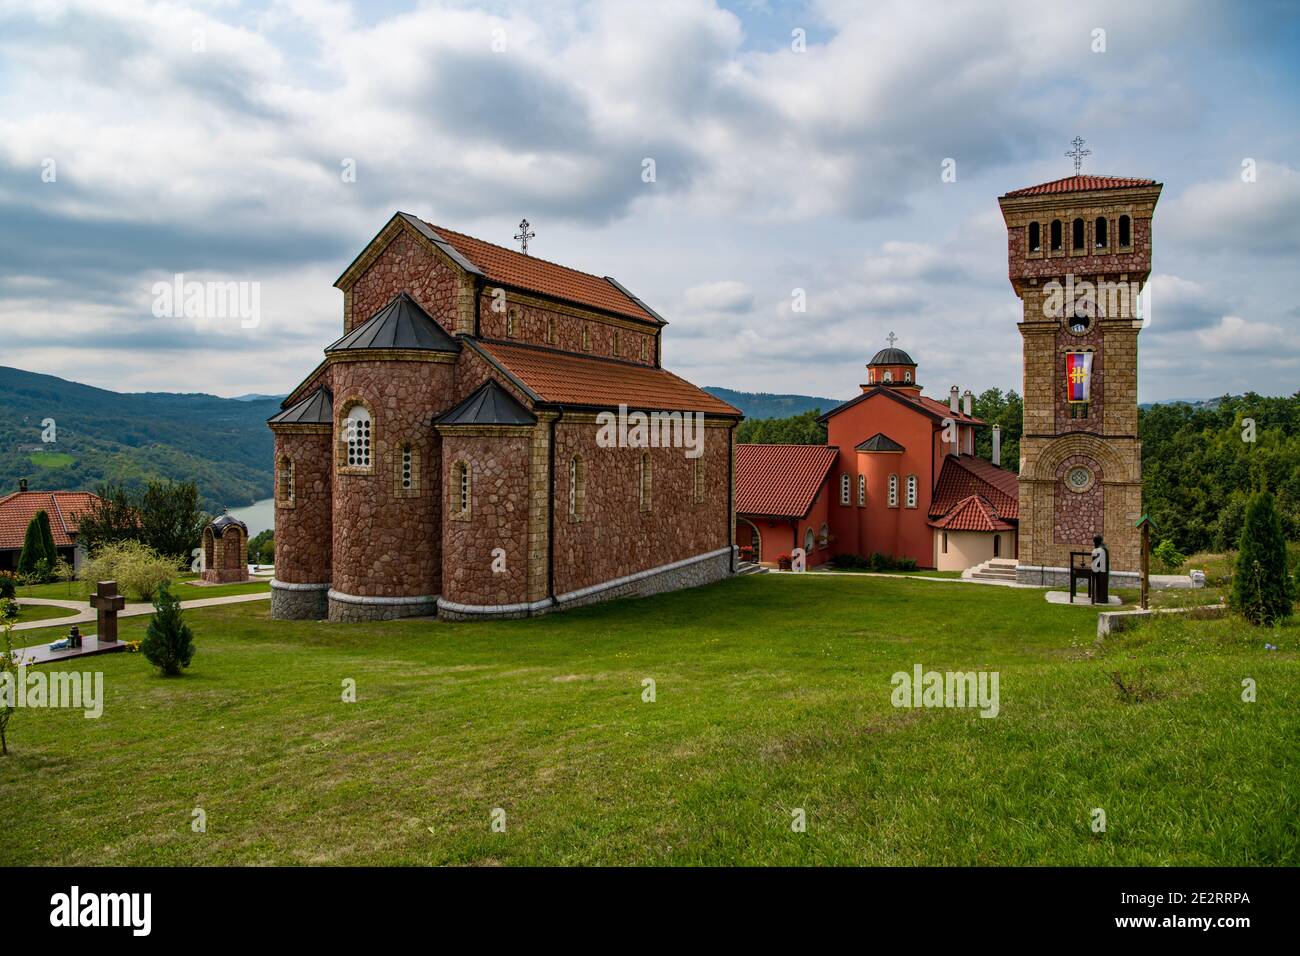 The Rujno Monastery was a established in 1537 in the Monastery of Saint George Rujan. It was one of the oldest printing houses in the Balkans. Stock Photo